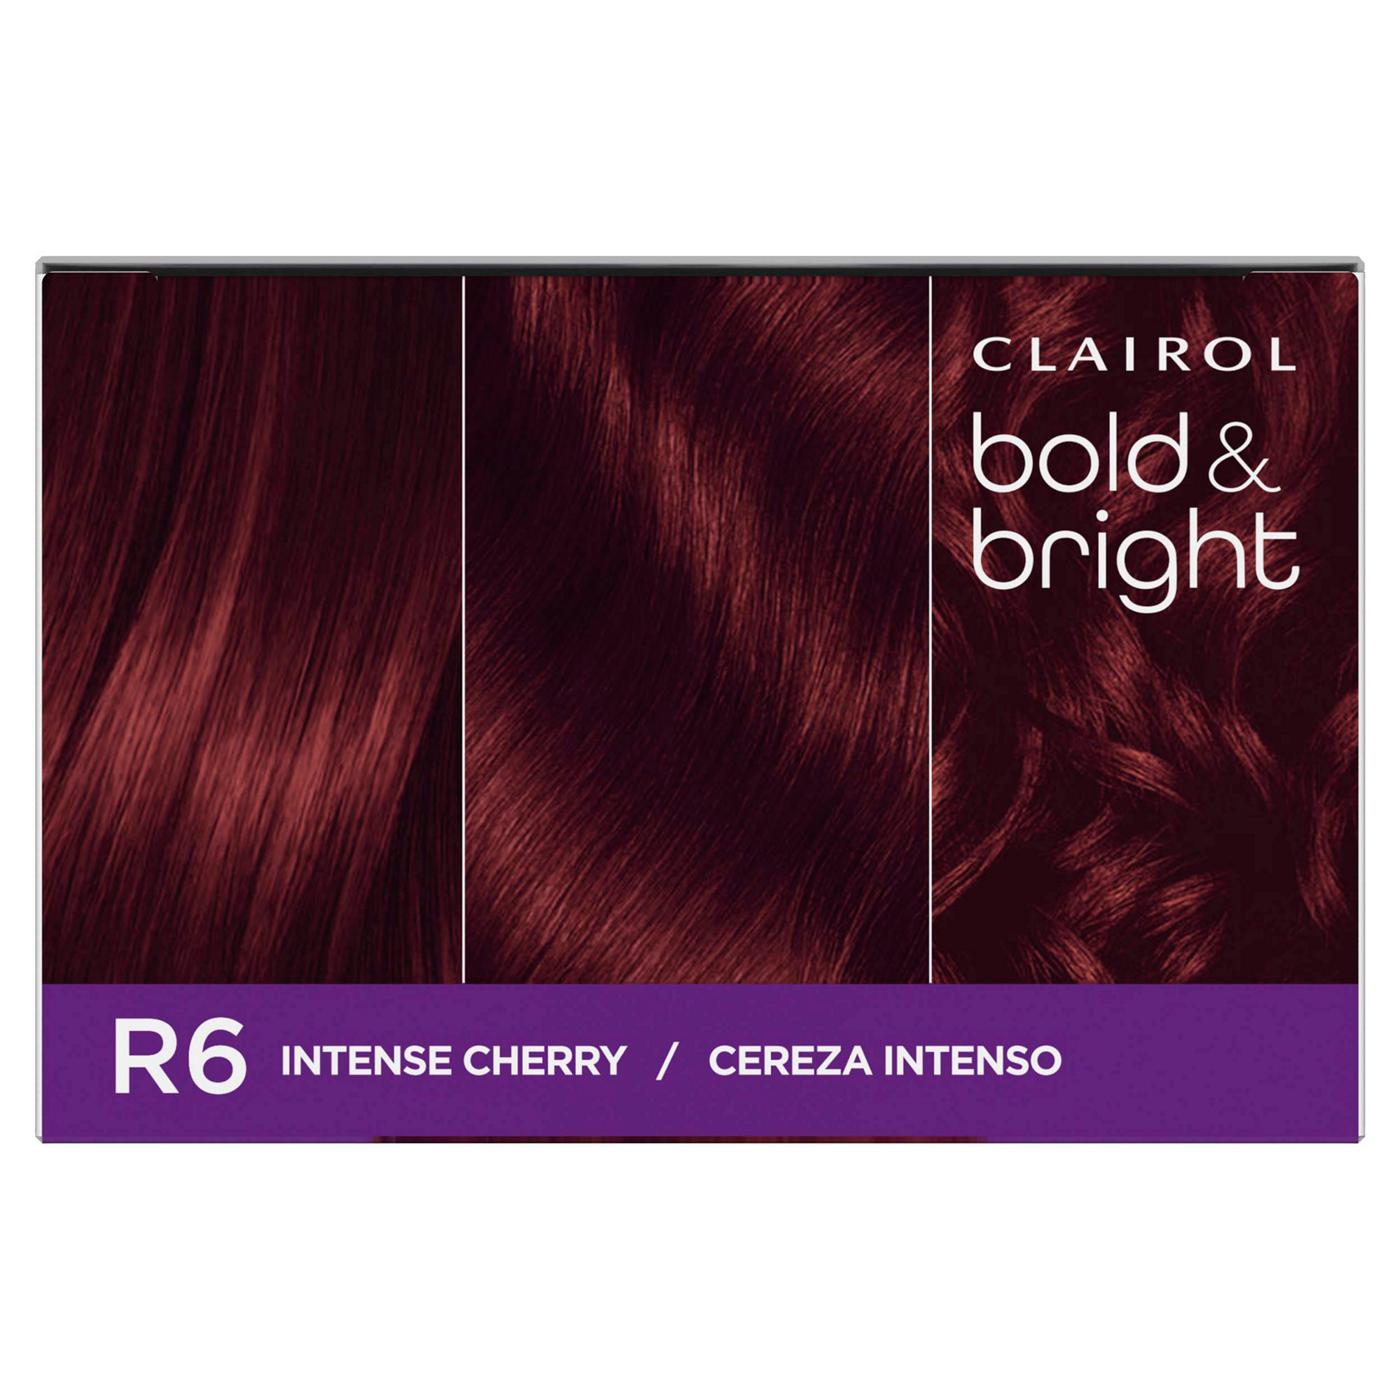 Clairol Bold & Bright Permanent Hair Color - R6 Intense Cherry; image 8 of 11